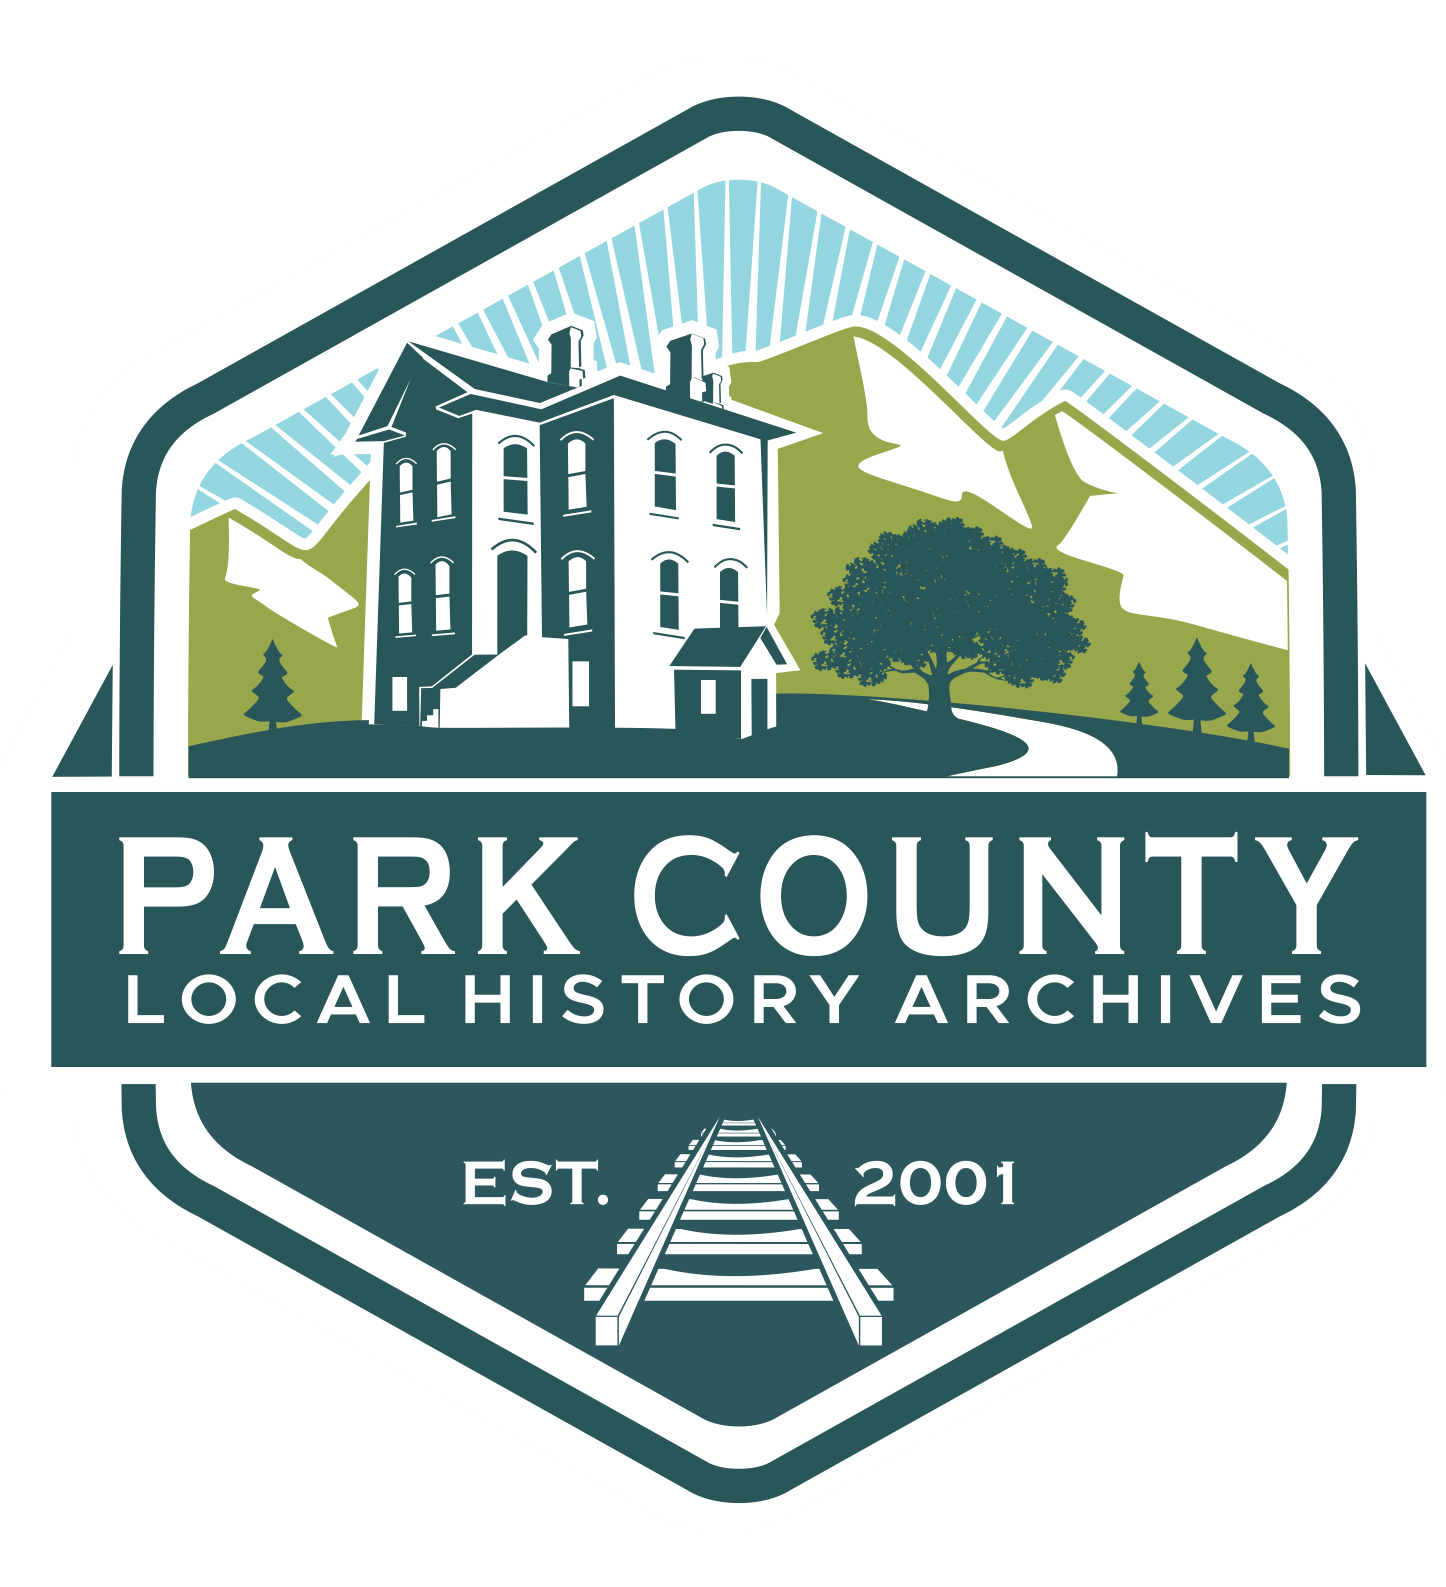 Park County Local History Archives